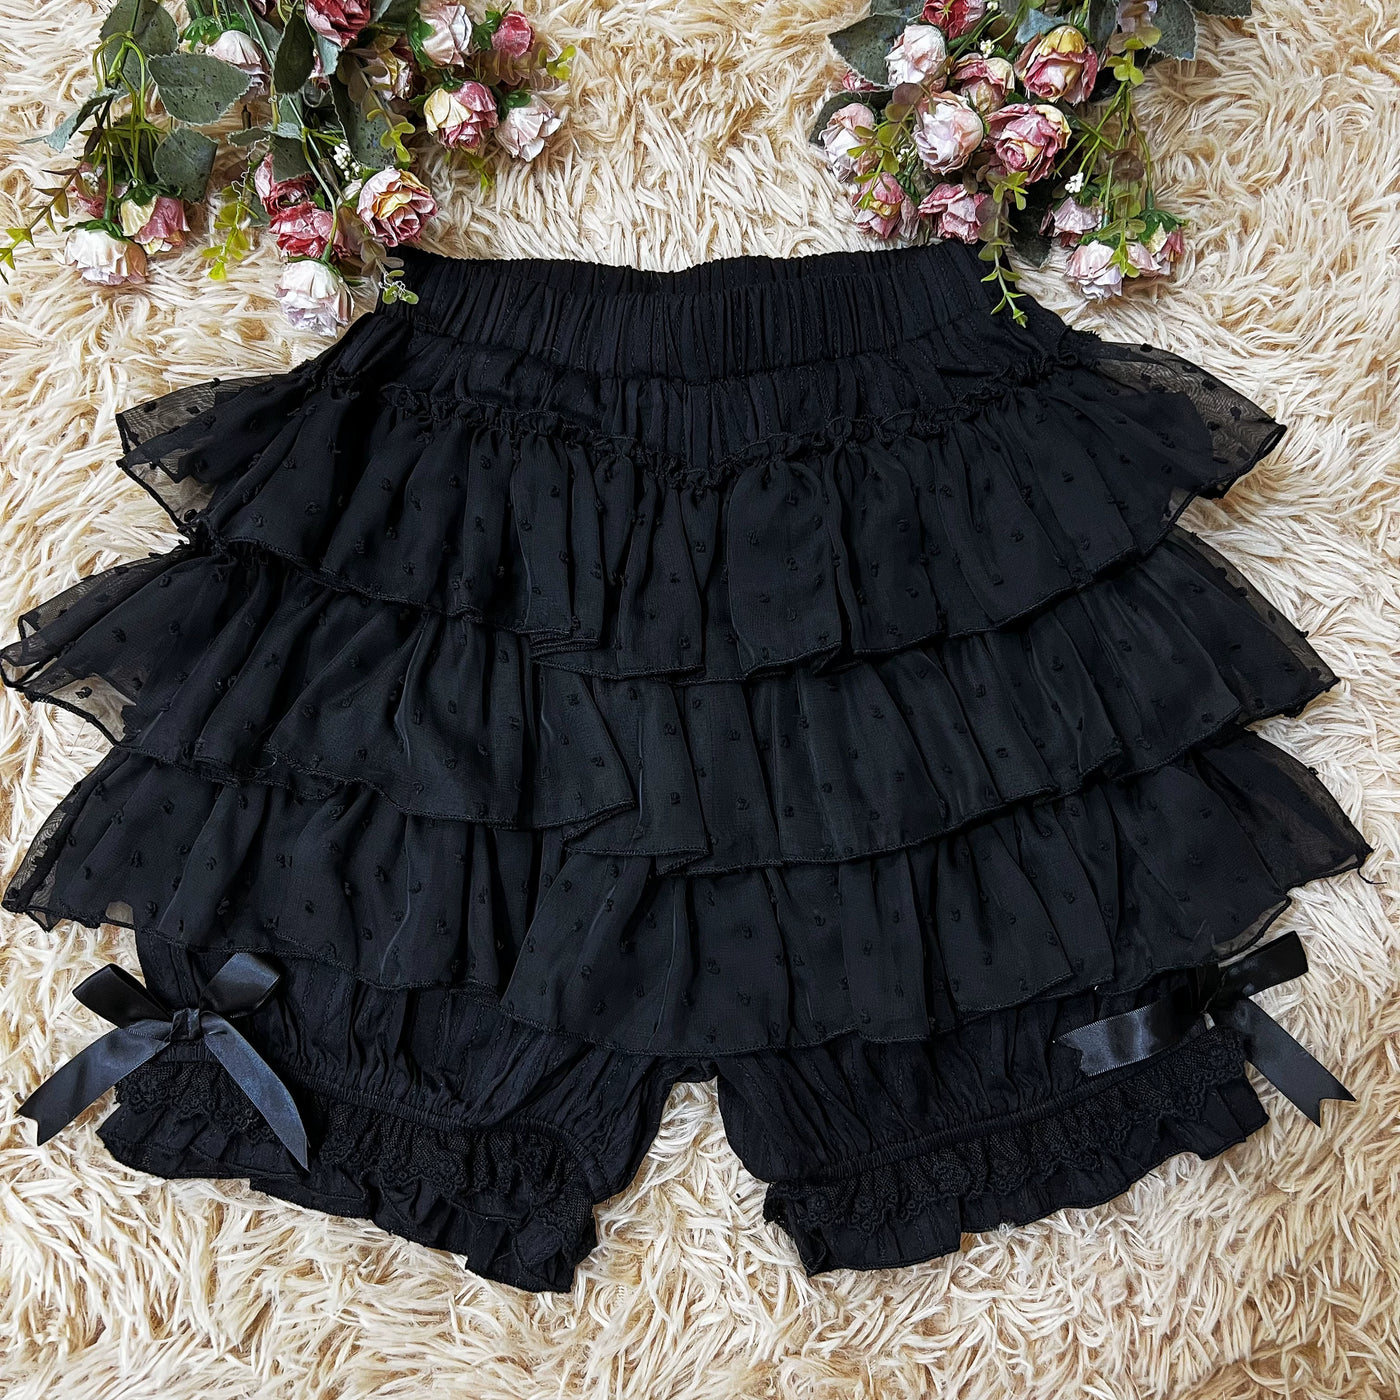 DMFS~Daily Lolita Bloomers Lace Cake Pants for Summer Wear Black Free size 